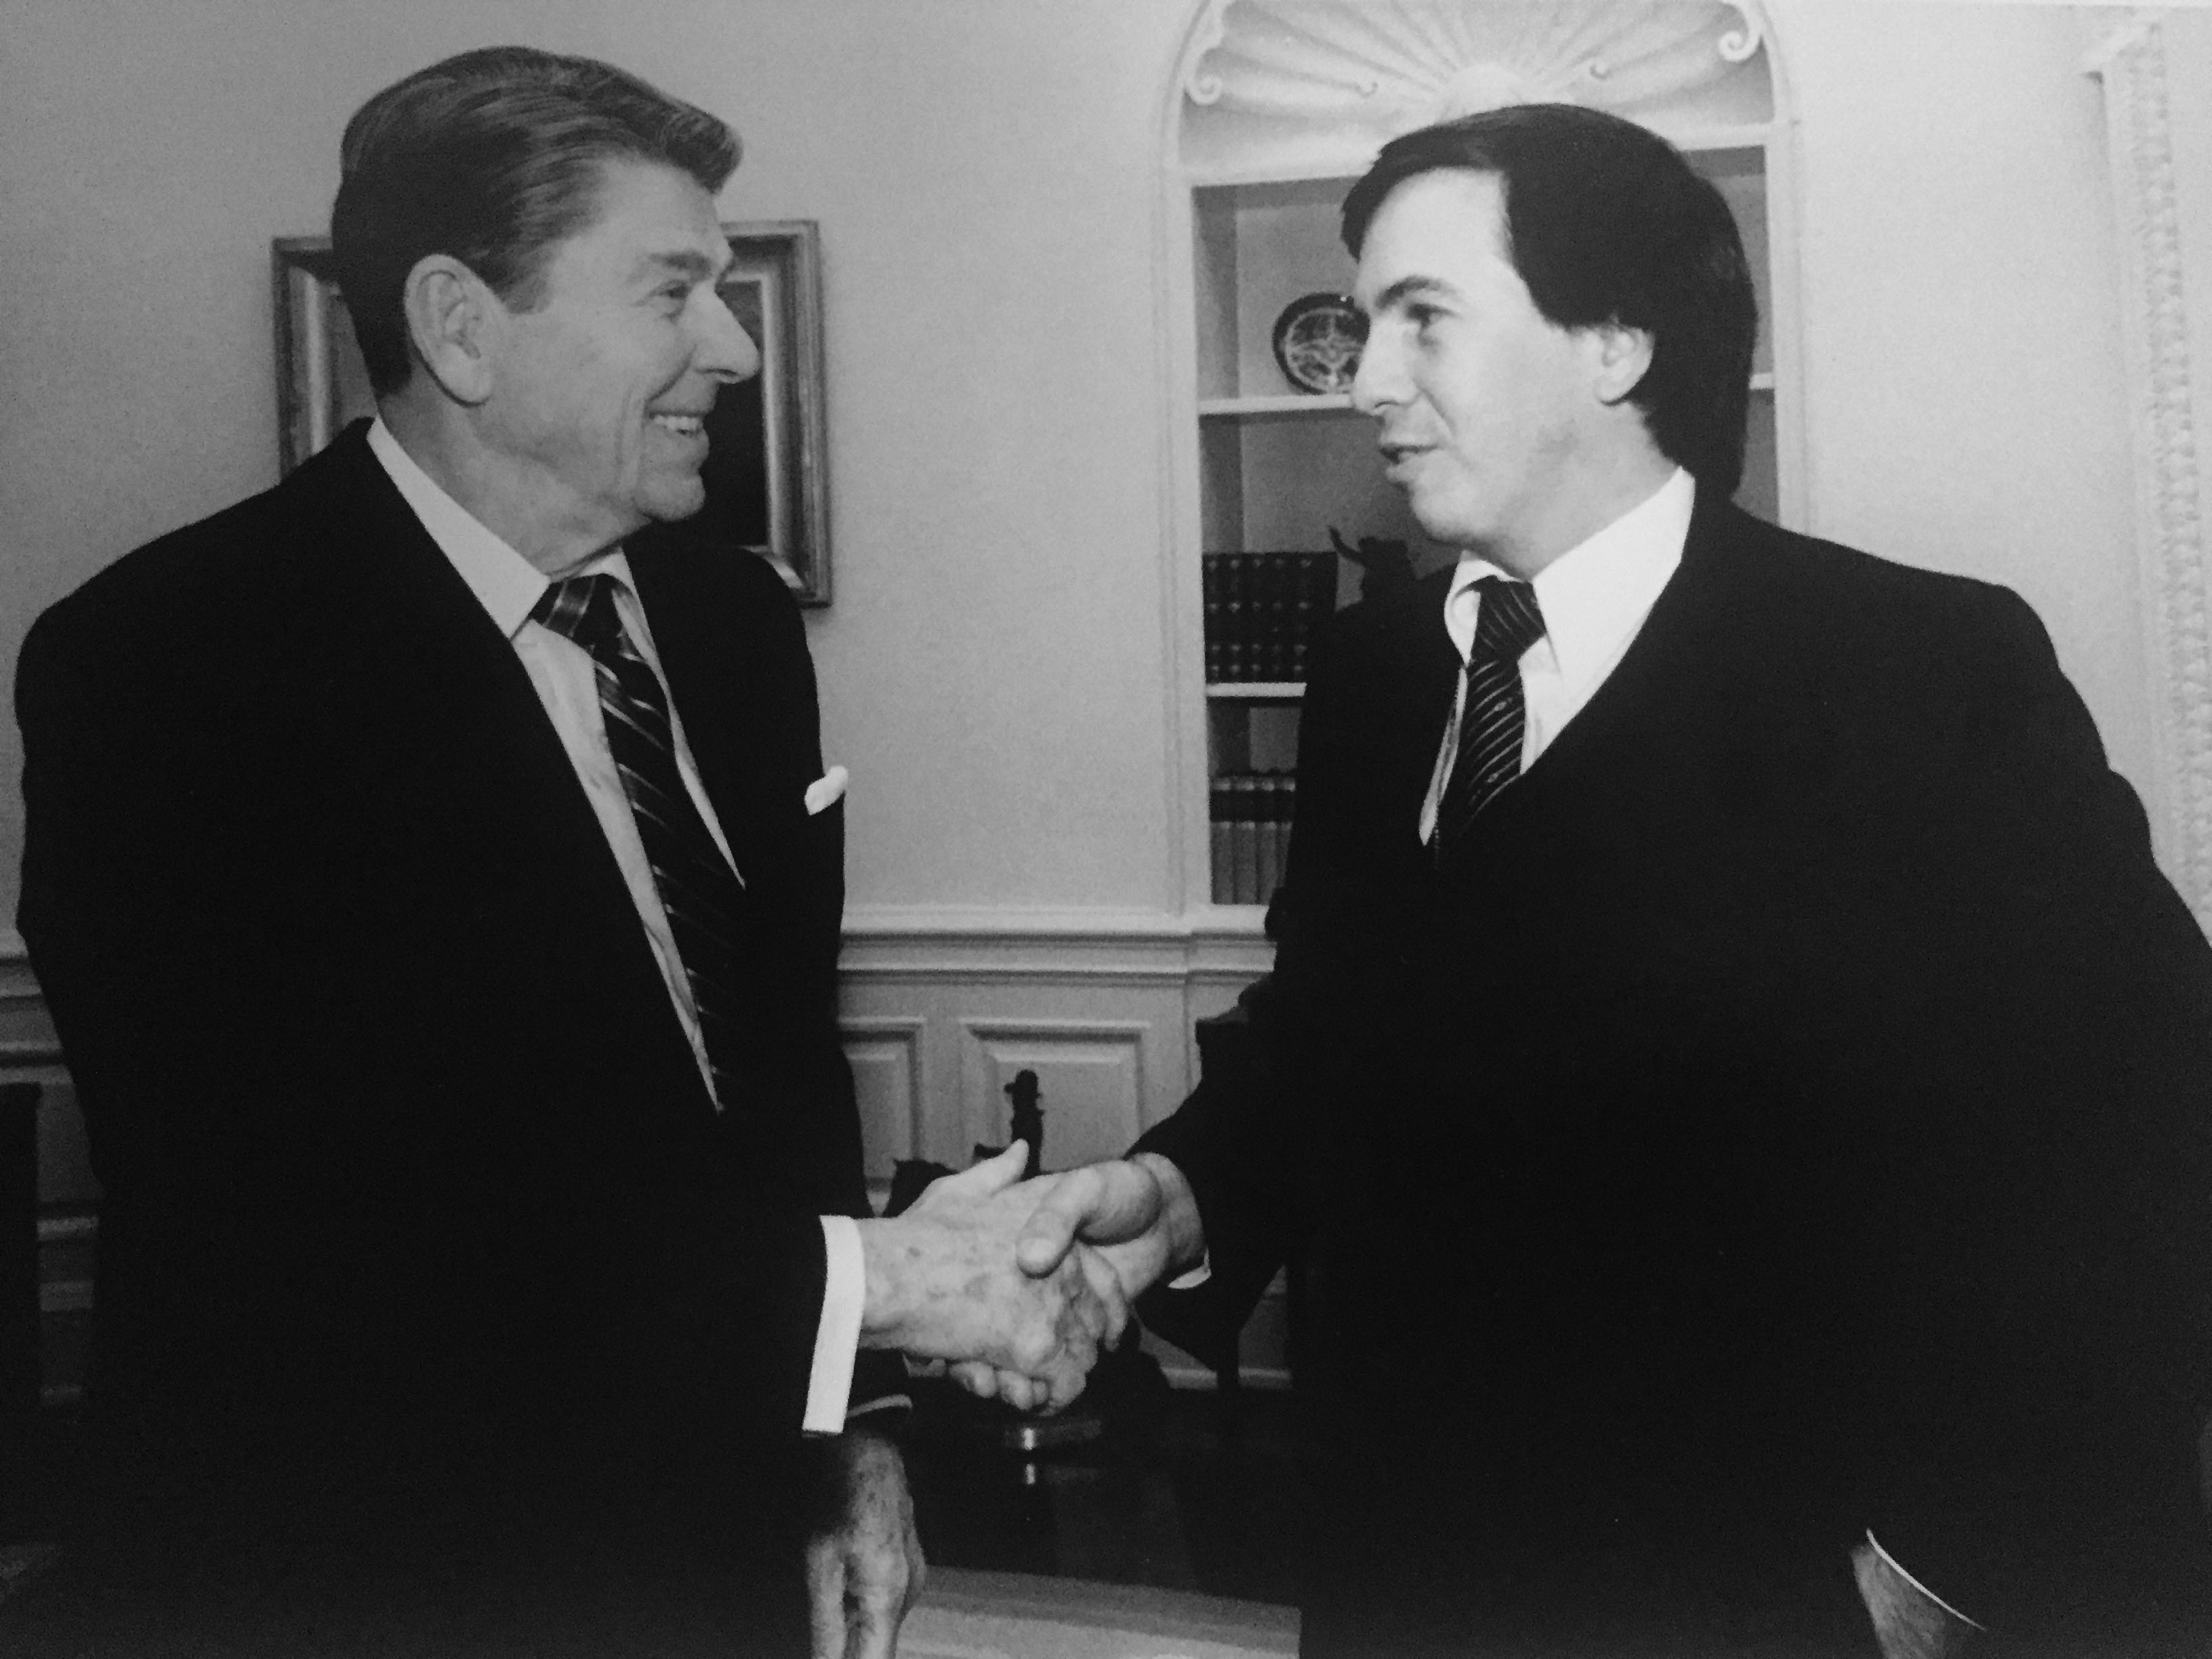 President Ronald Reagan (left) shakes hands with David Woo, who was a staff photographer for...